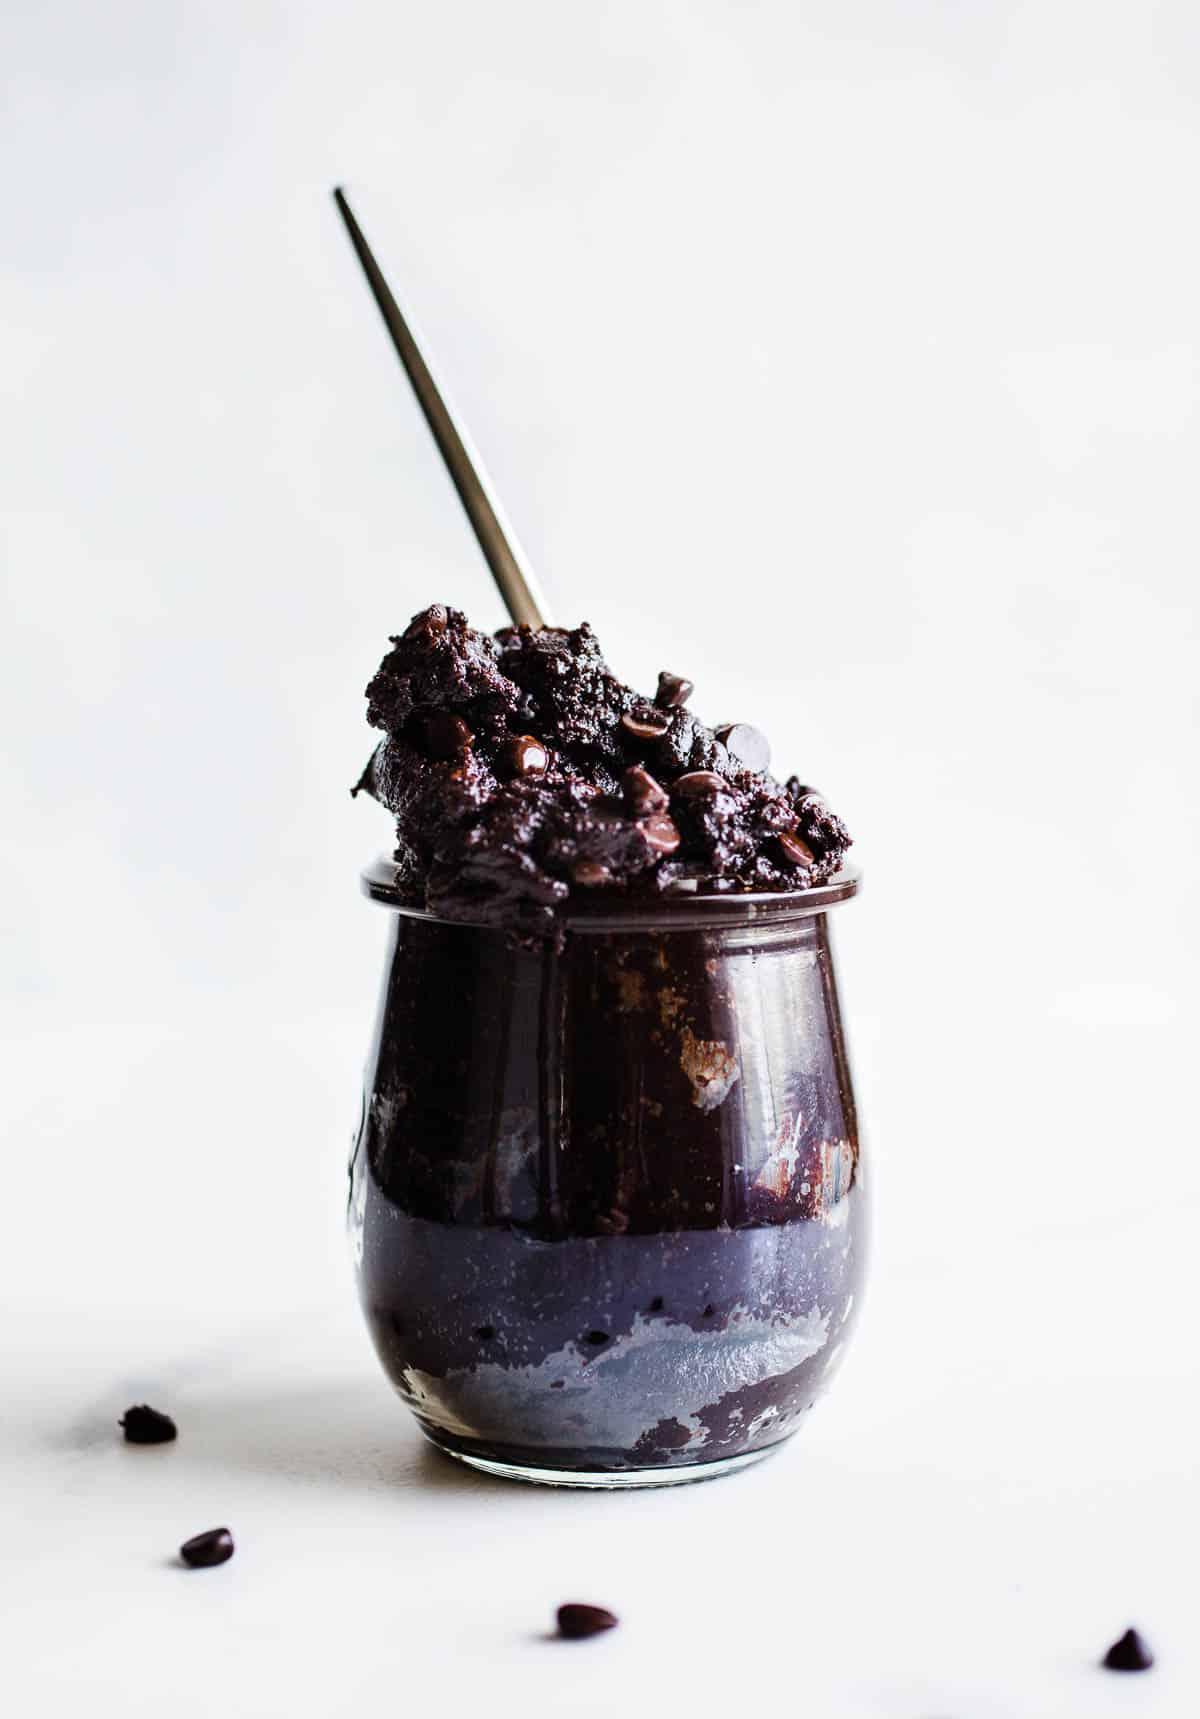 Edible brownie batter with chocolate chips in a glass jar with spoon.